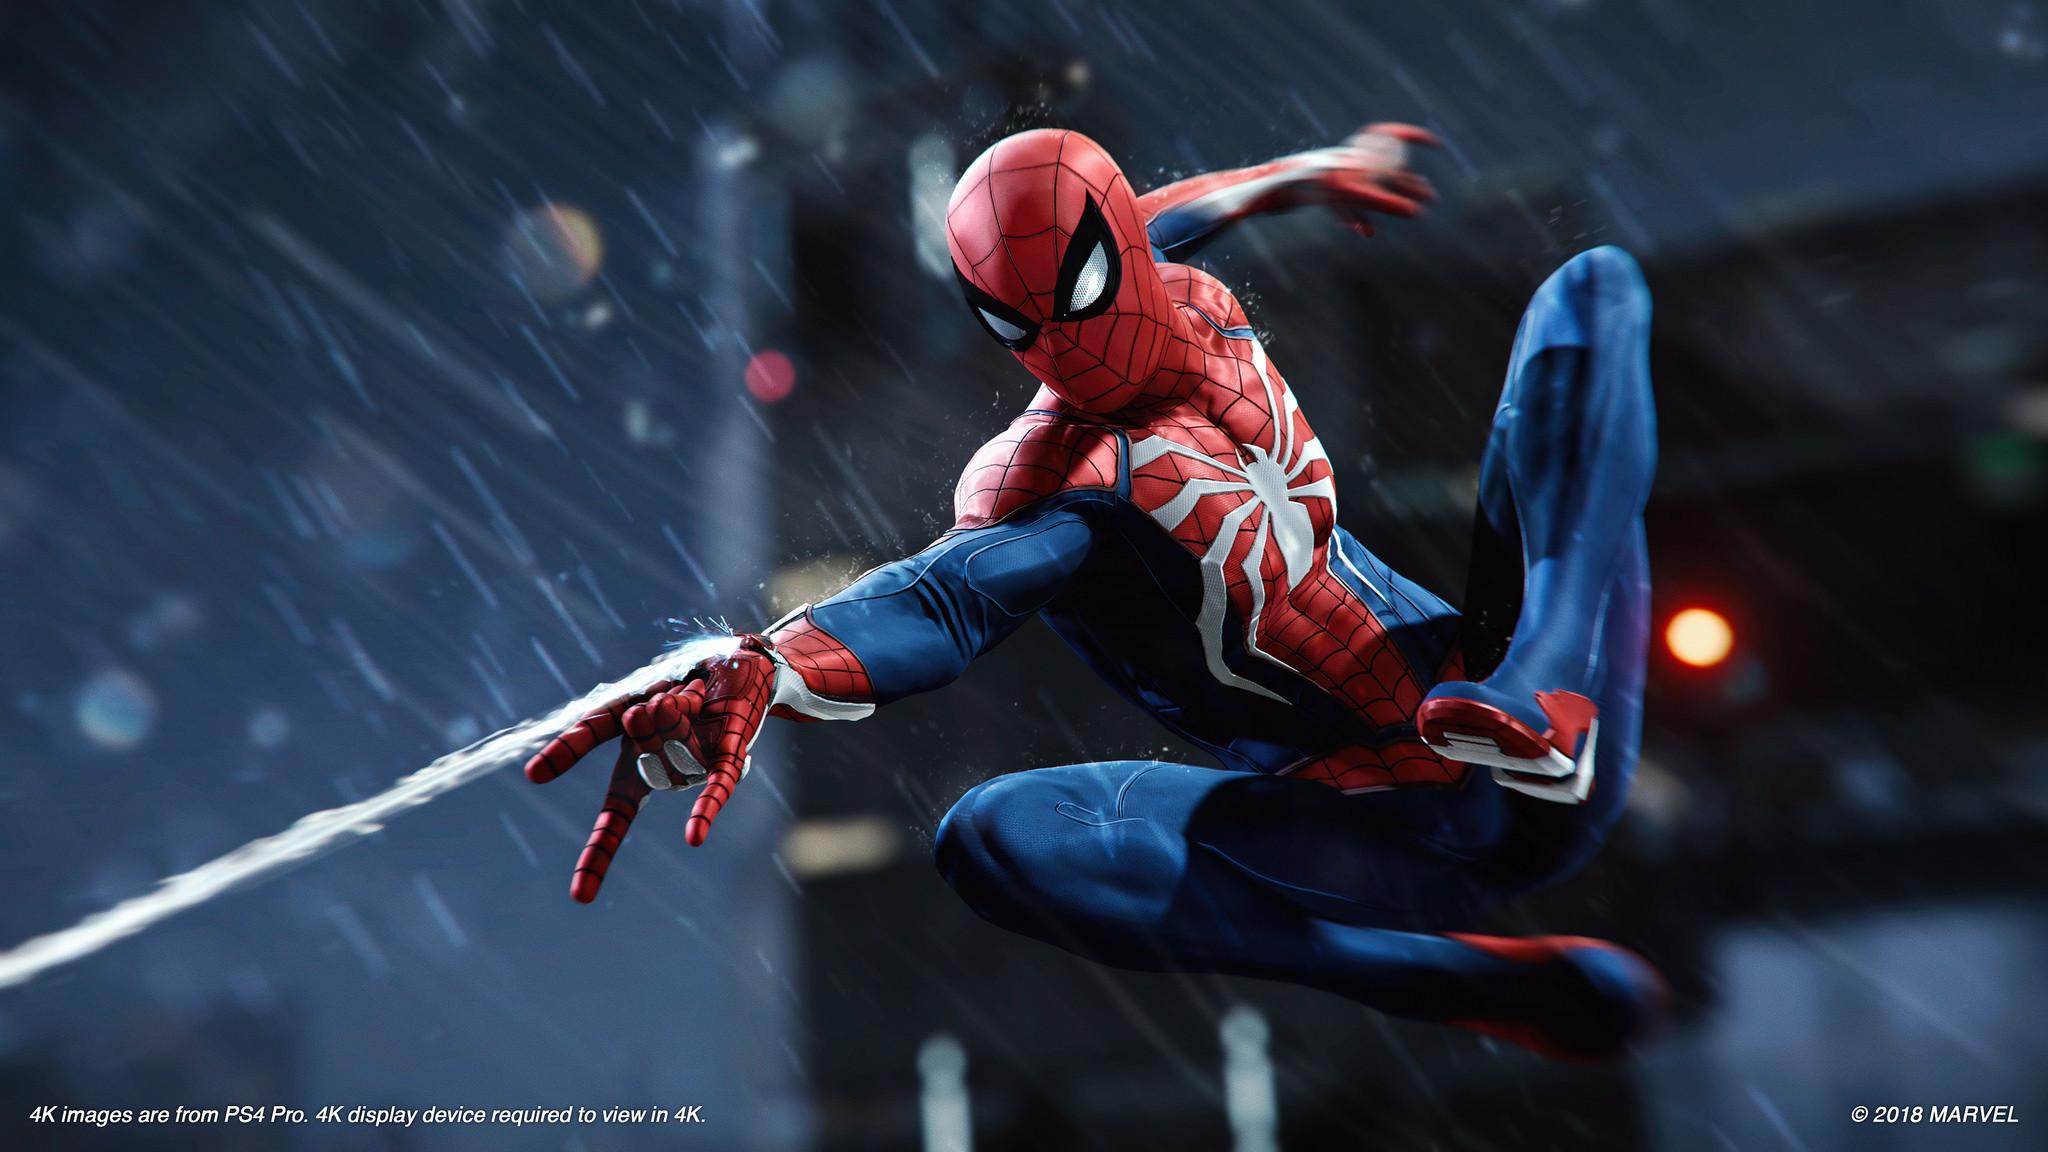 Games Inbox: Are You Planning To Get Marvel's Spider Man?